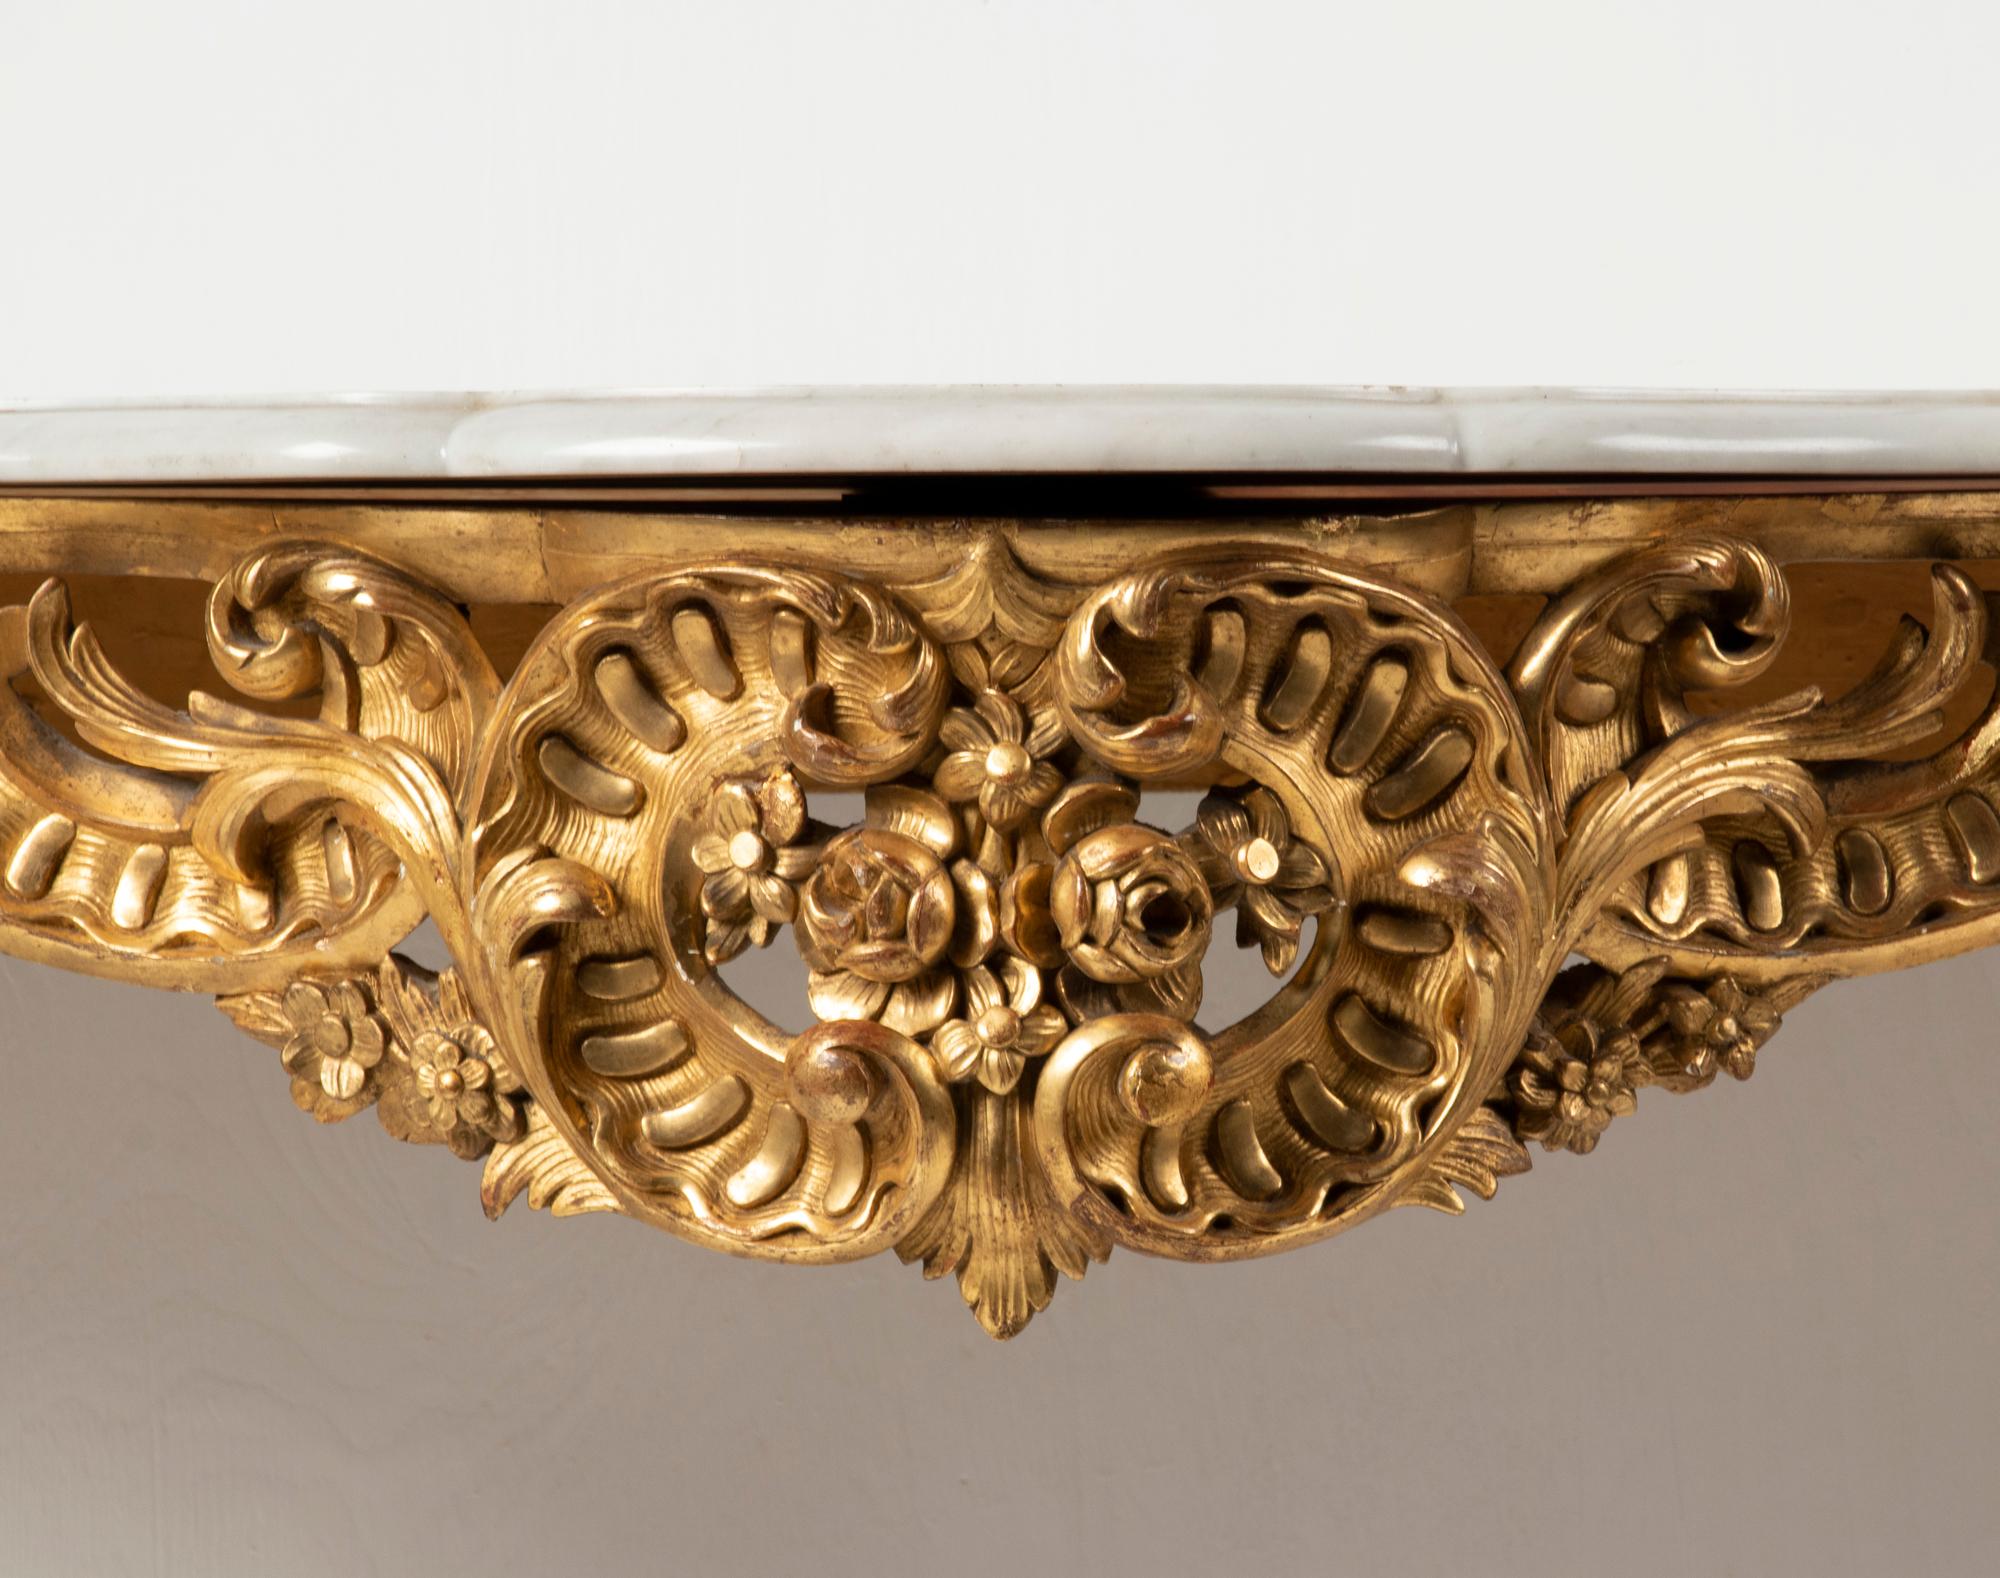 Late 19th Century 19th Century French Wooden Carved and Gilded Console Table by Maison Janiaud For Sale